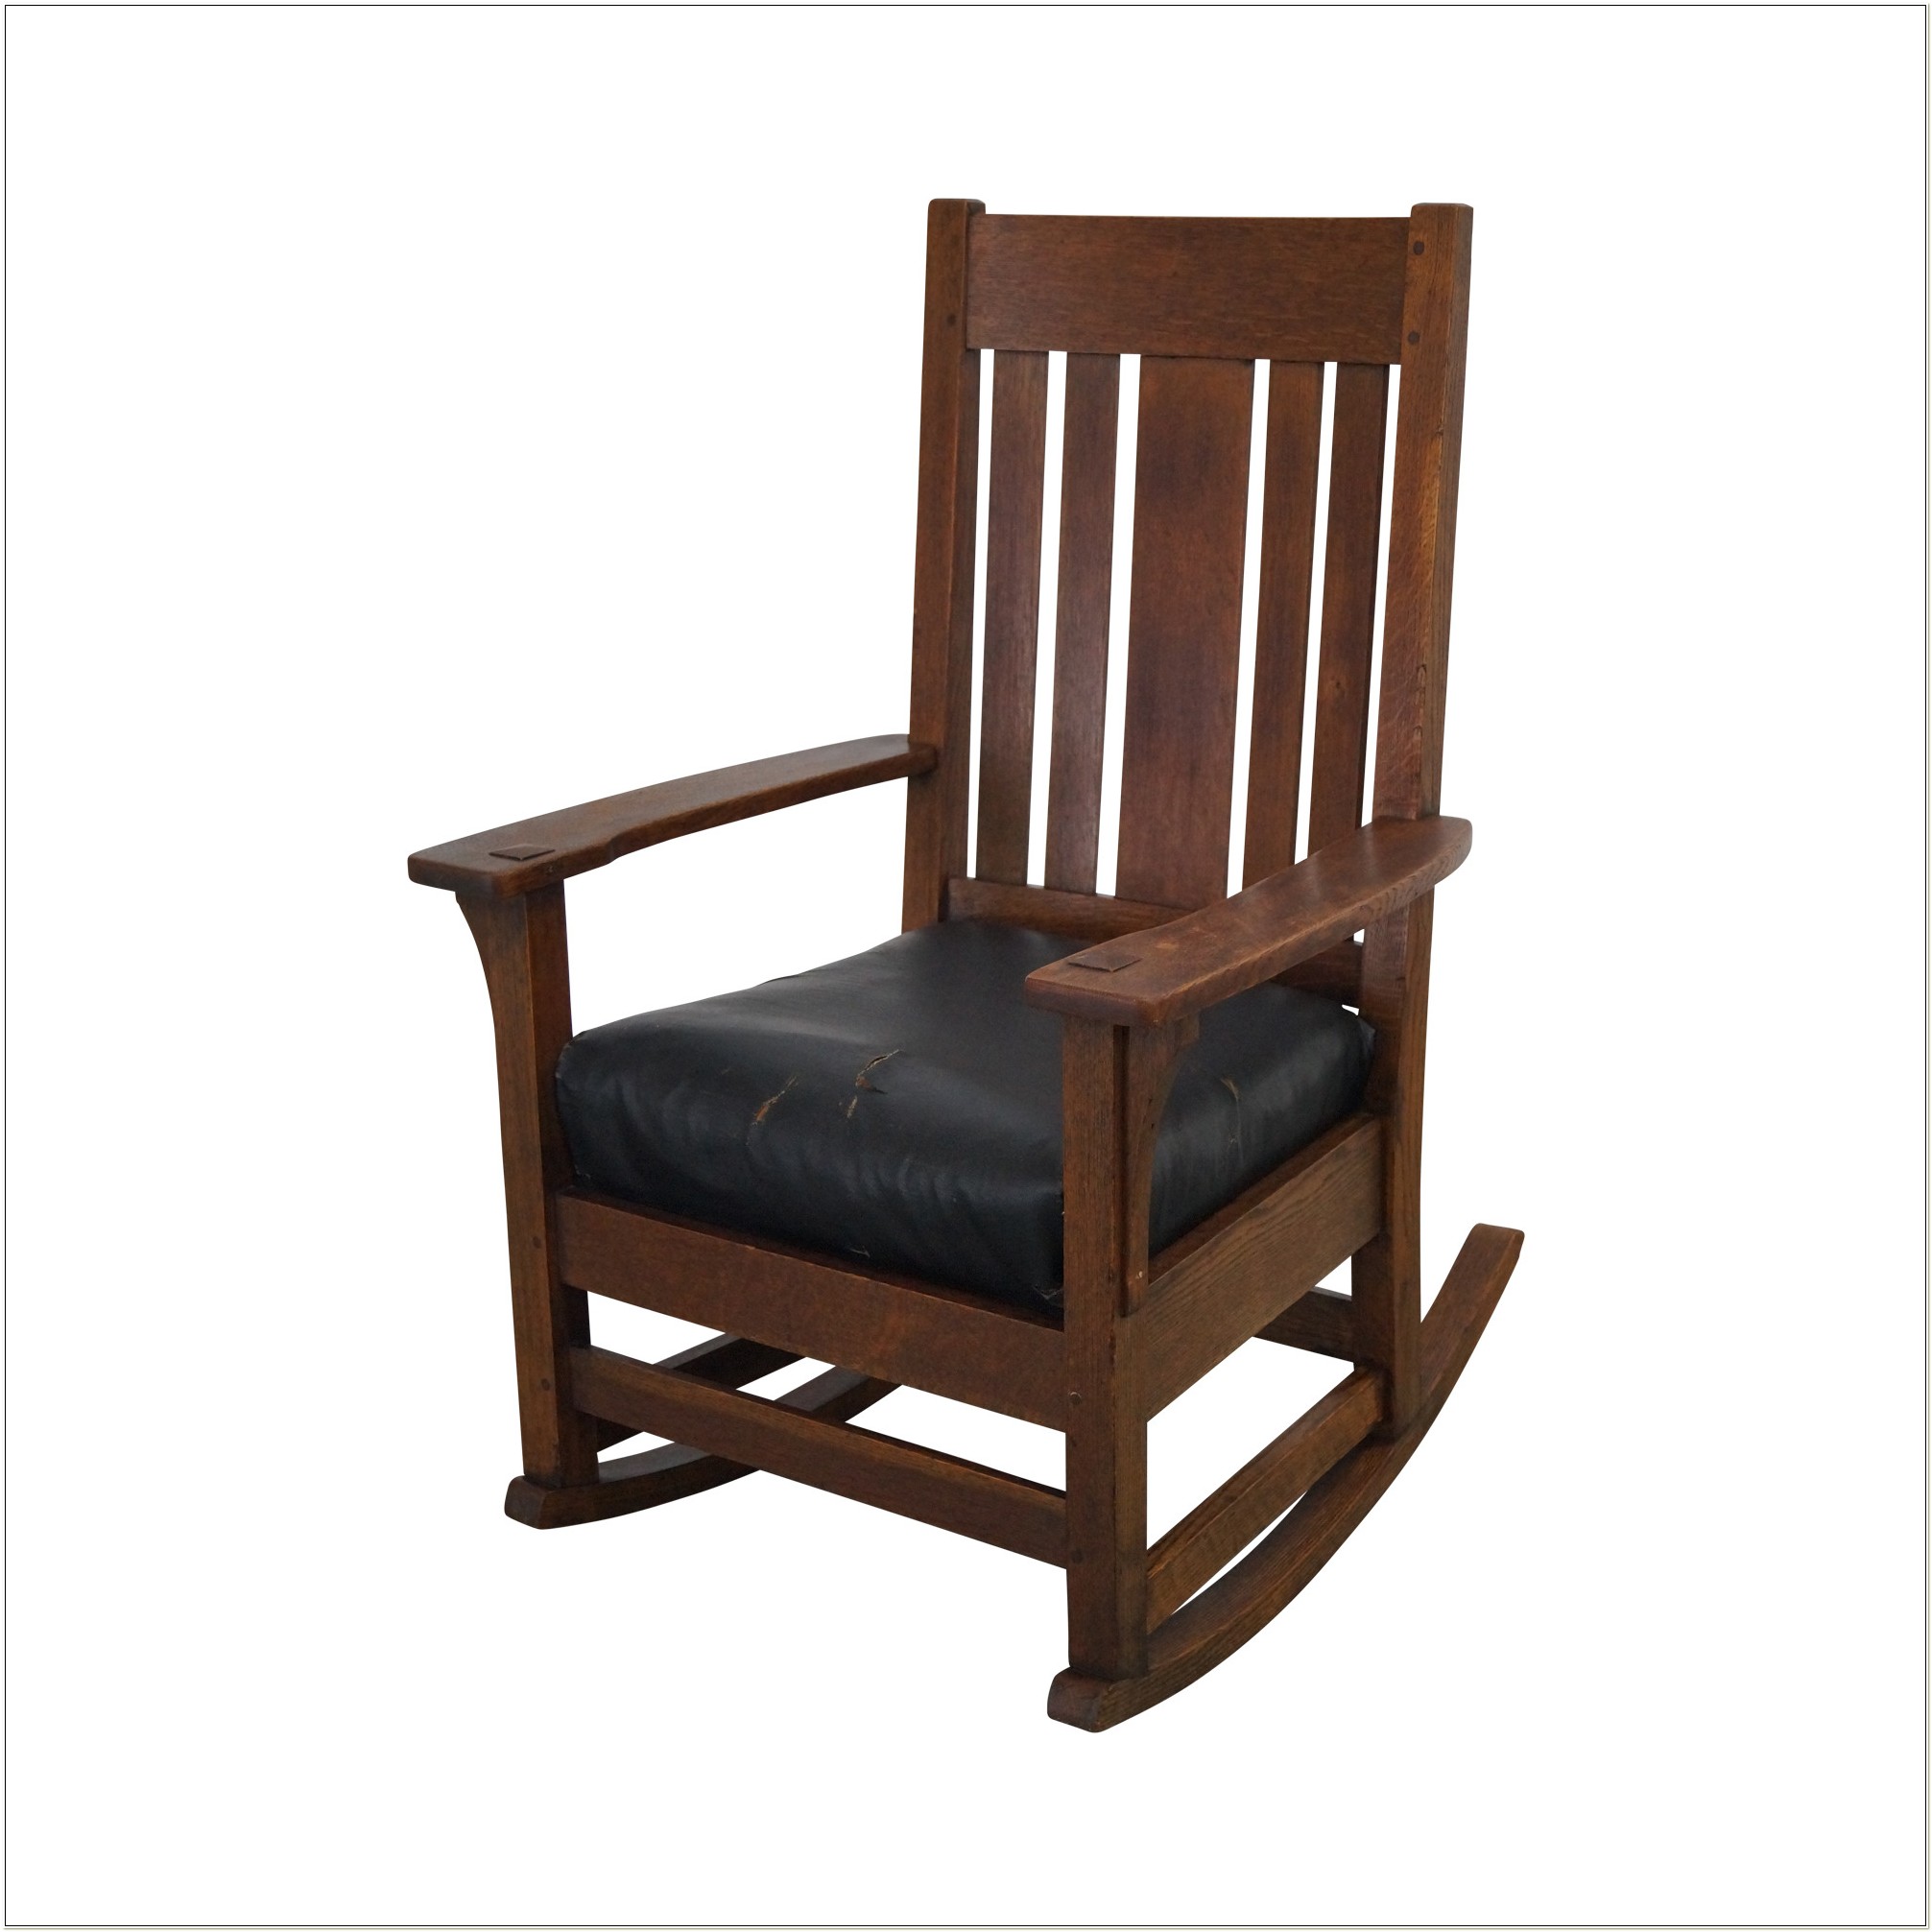 Vintage Mission Style Oak Rocking Chair - Chairs : Home Decorating